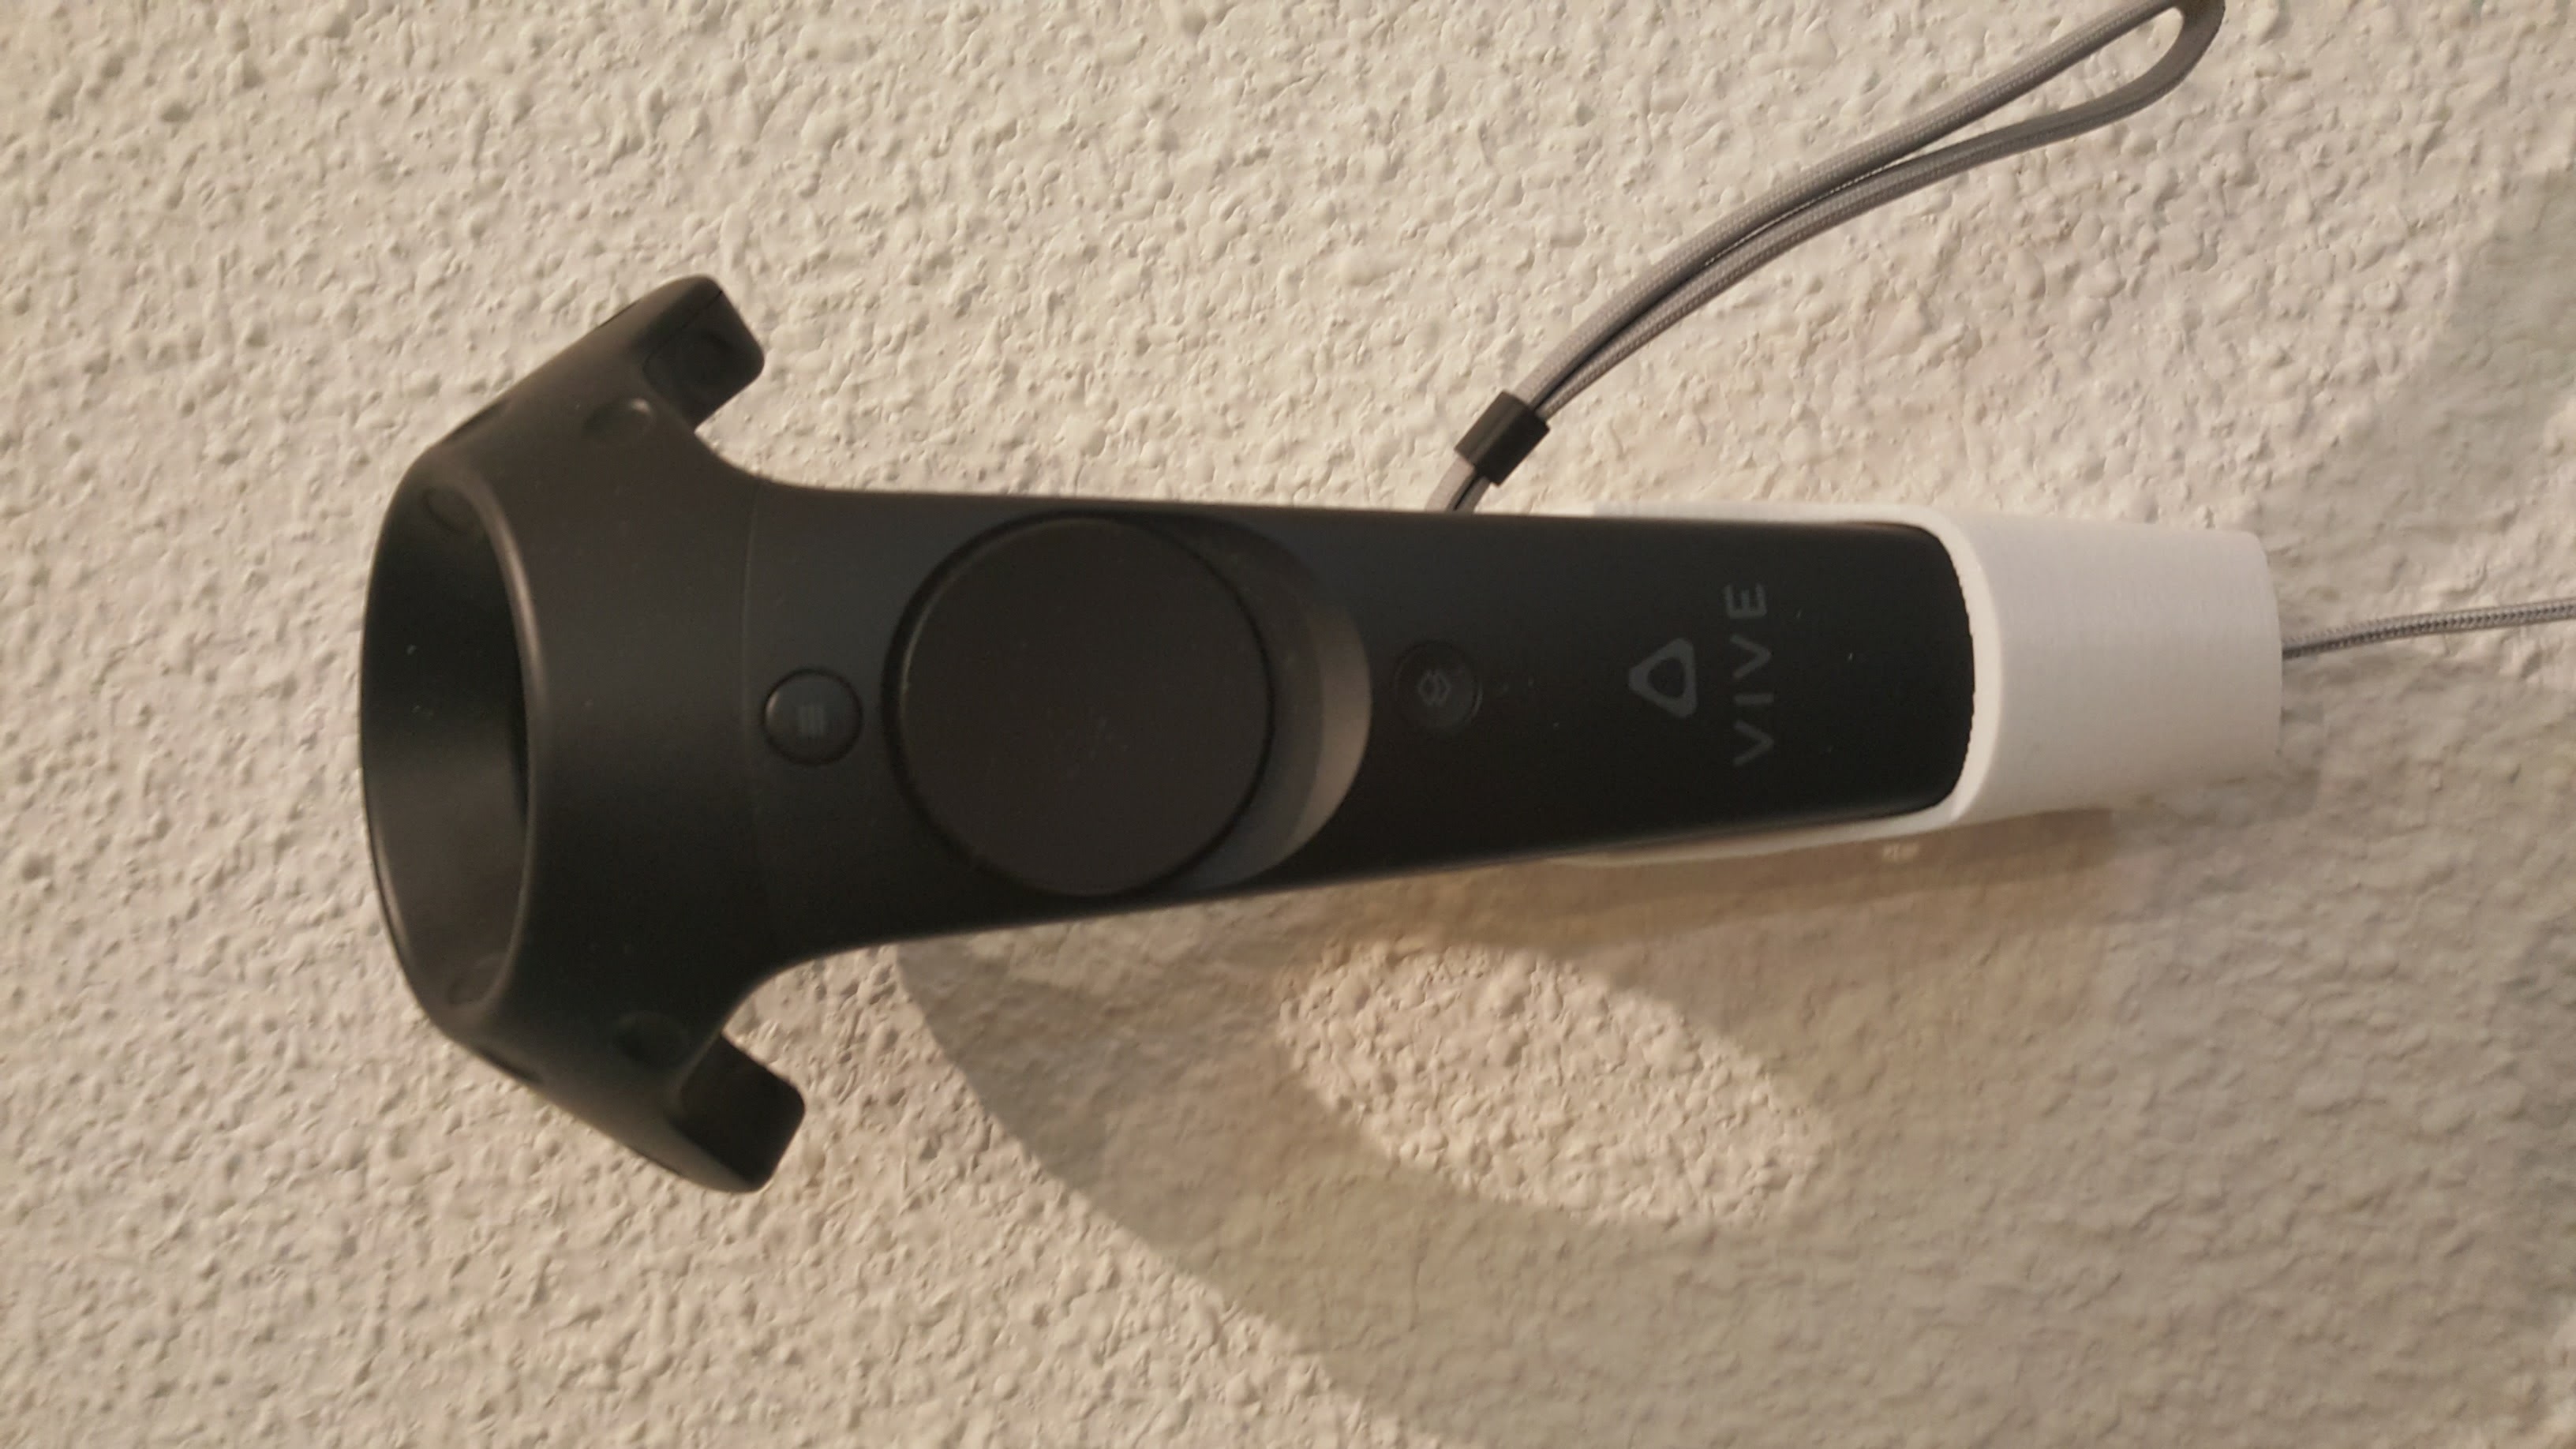 HTC Vive controller wall mount and charging station